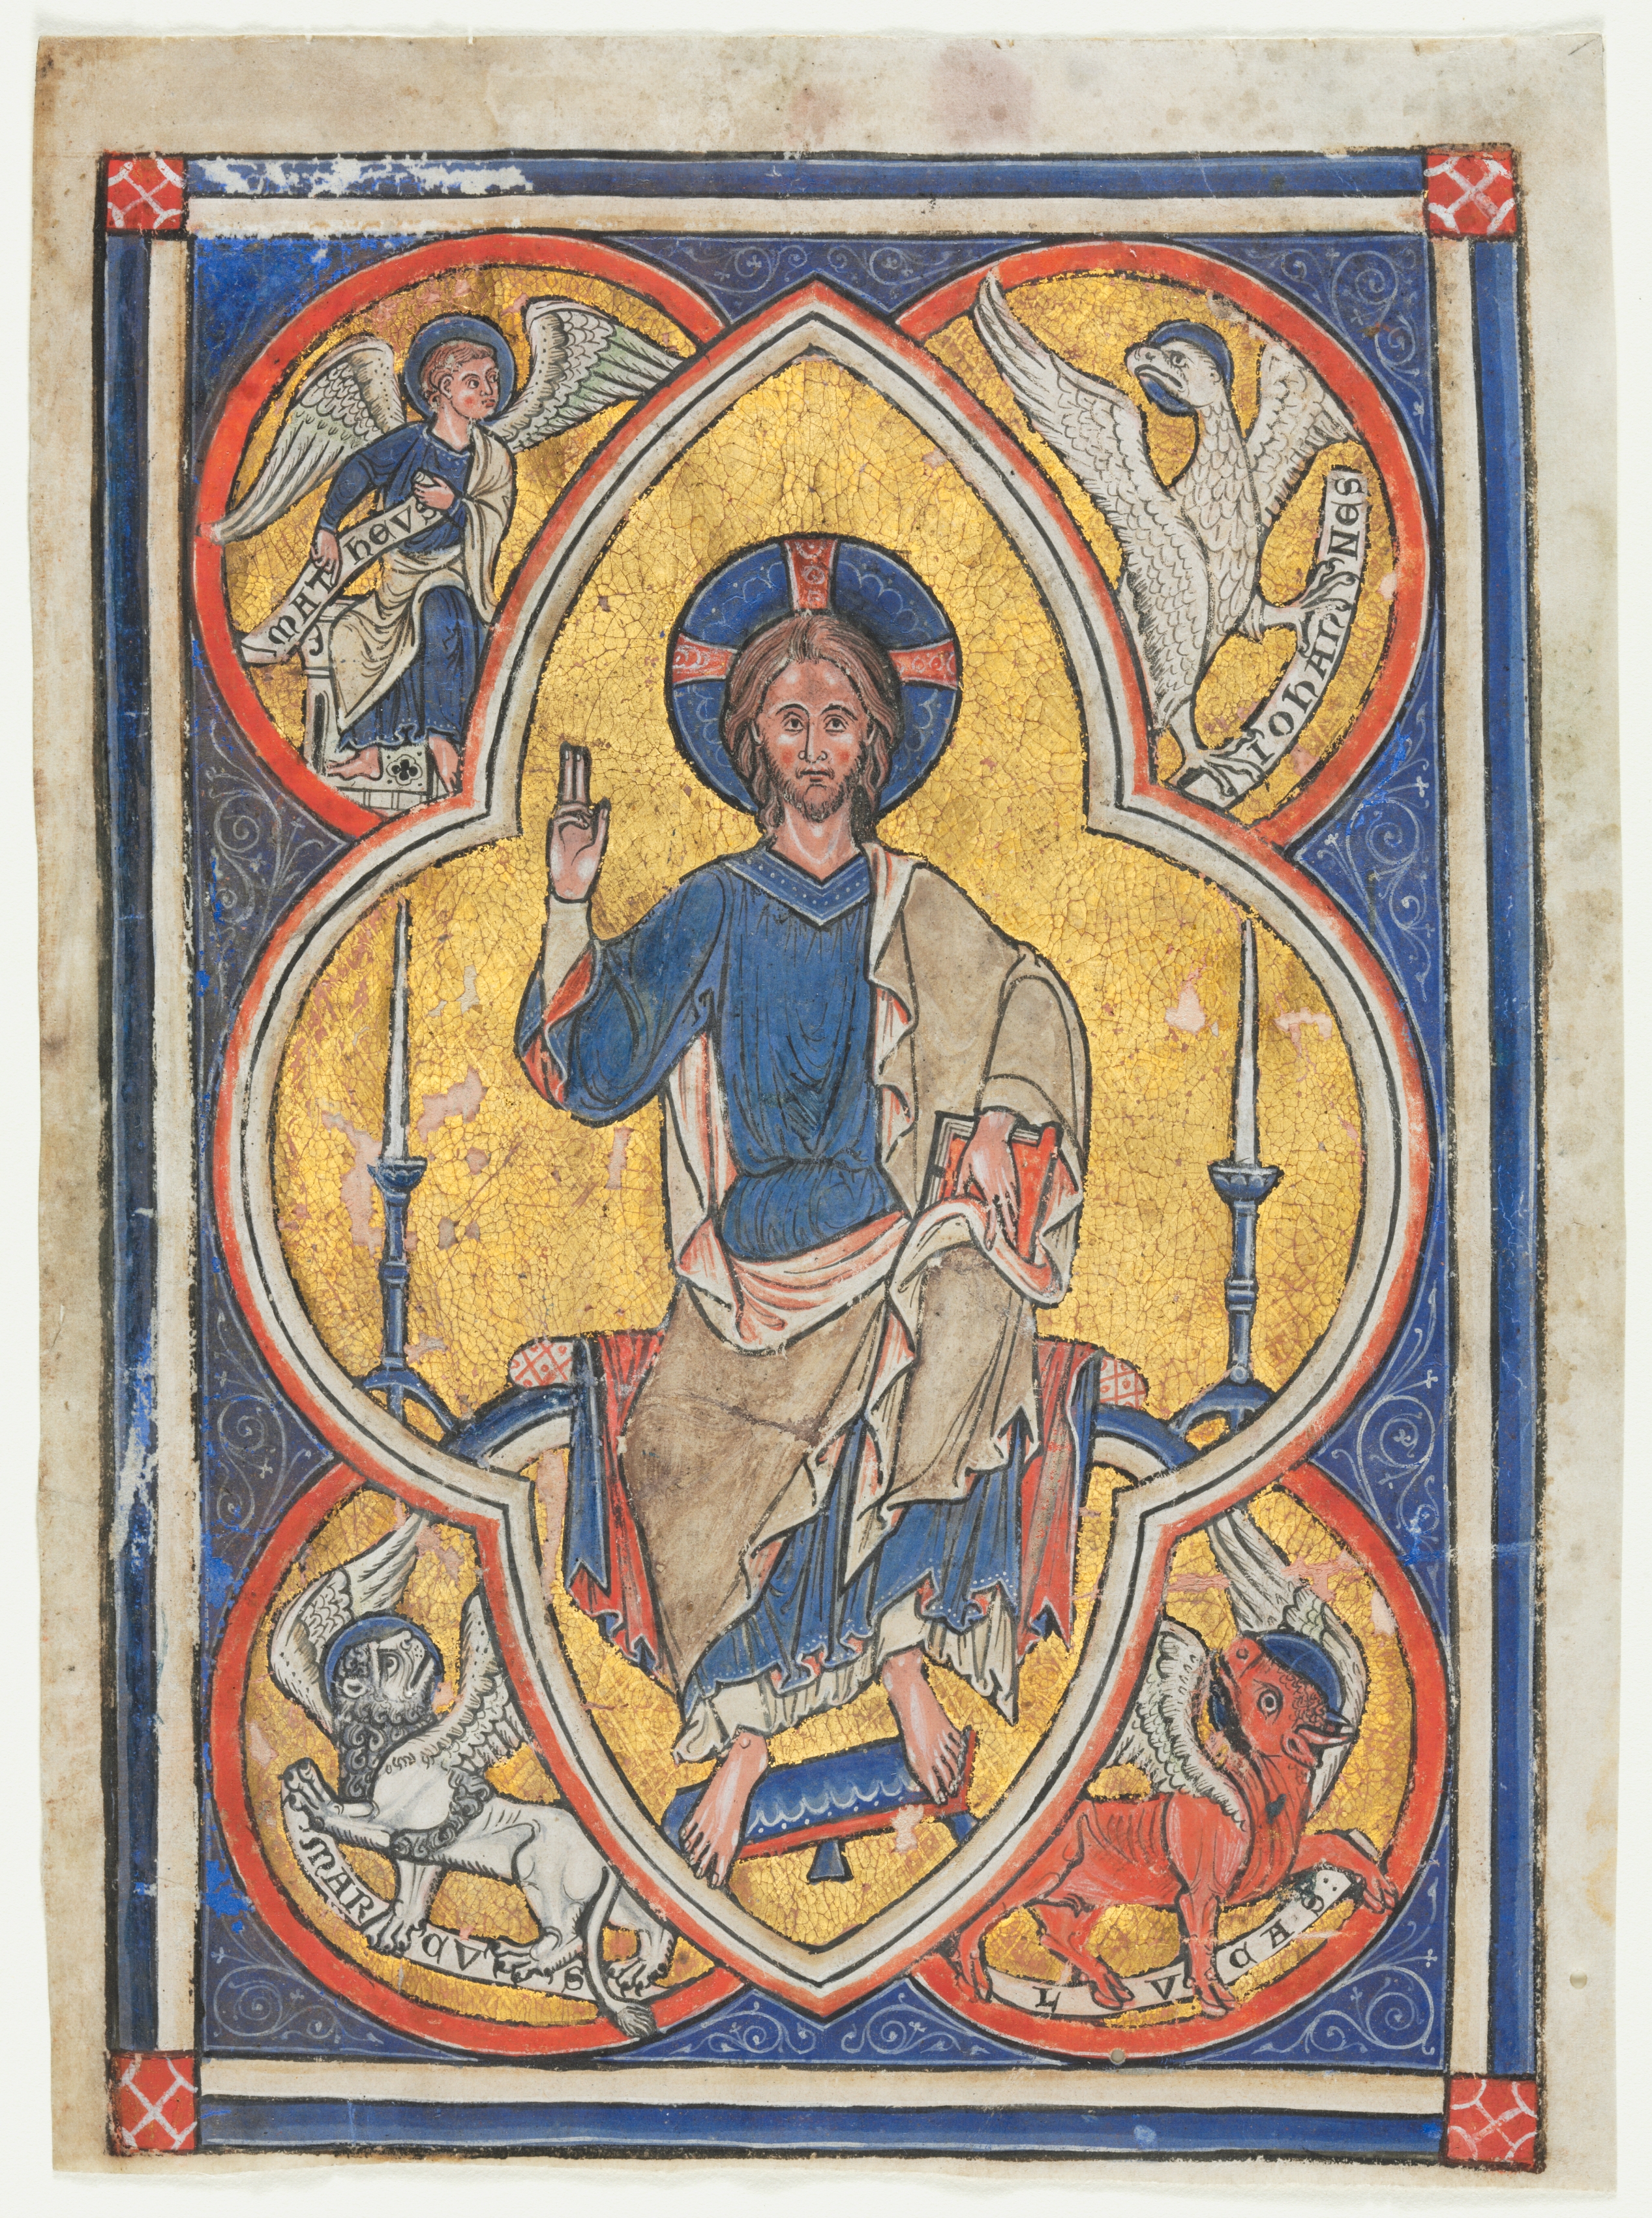 Miniature Excised from a Psalter: Christ in Majesty with Symbols of the Four Evangelists